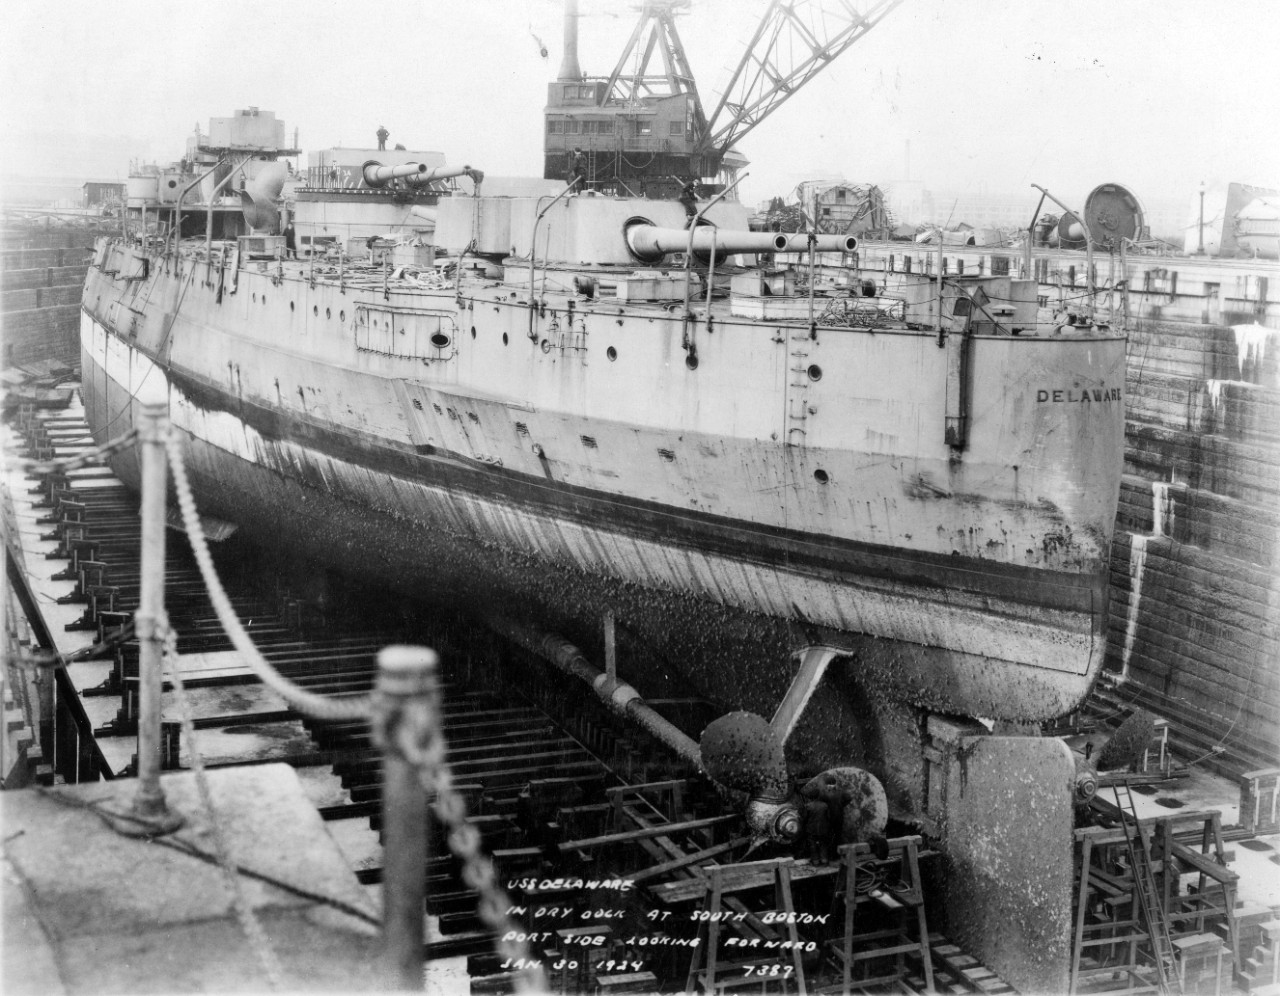 Delaware in dry dock at the South Boston Annex, Boston Navy Yard, Mass., on 30 January 1924. The ship has been stripped in preparation for scrapping. Note propellers, rudder, armor belt and heavy fouling on her underwater hull. (Naval History and Heritage Command Photograph NH 54675)